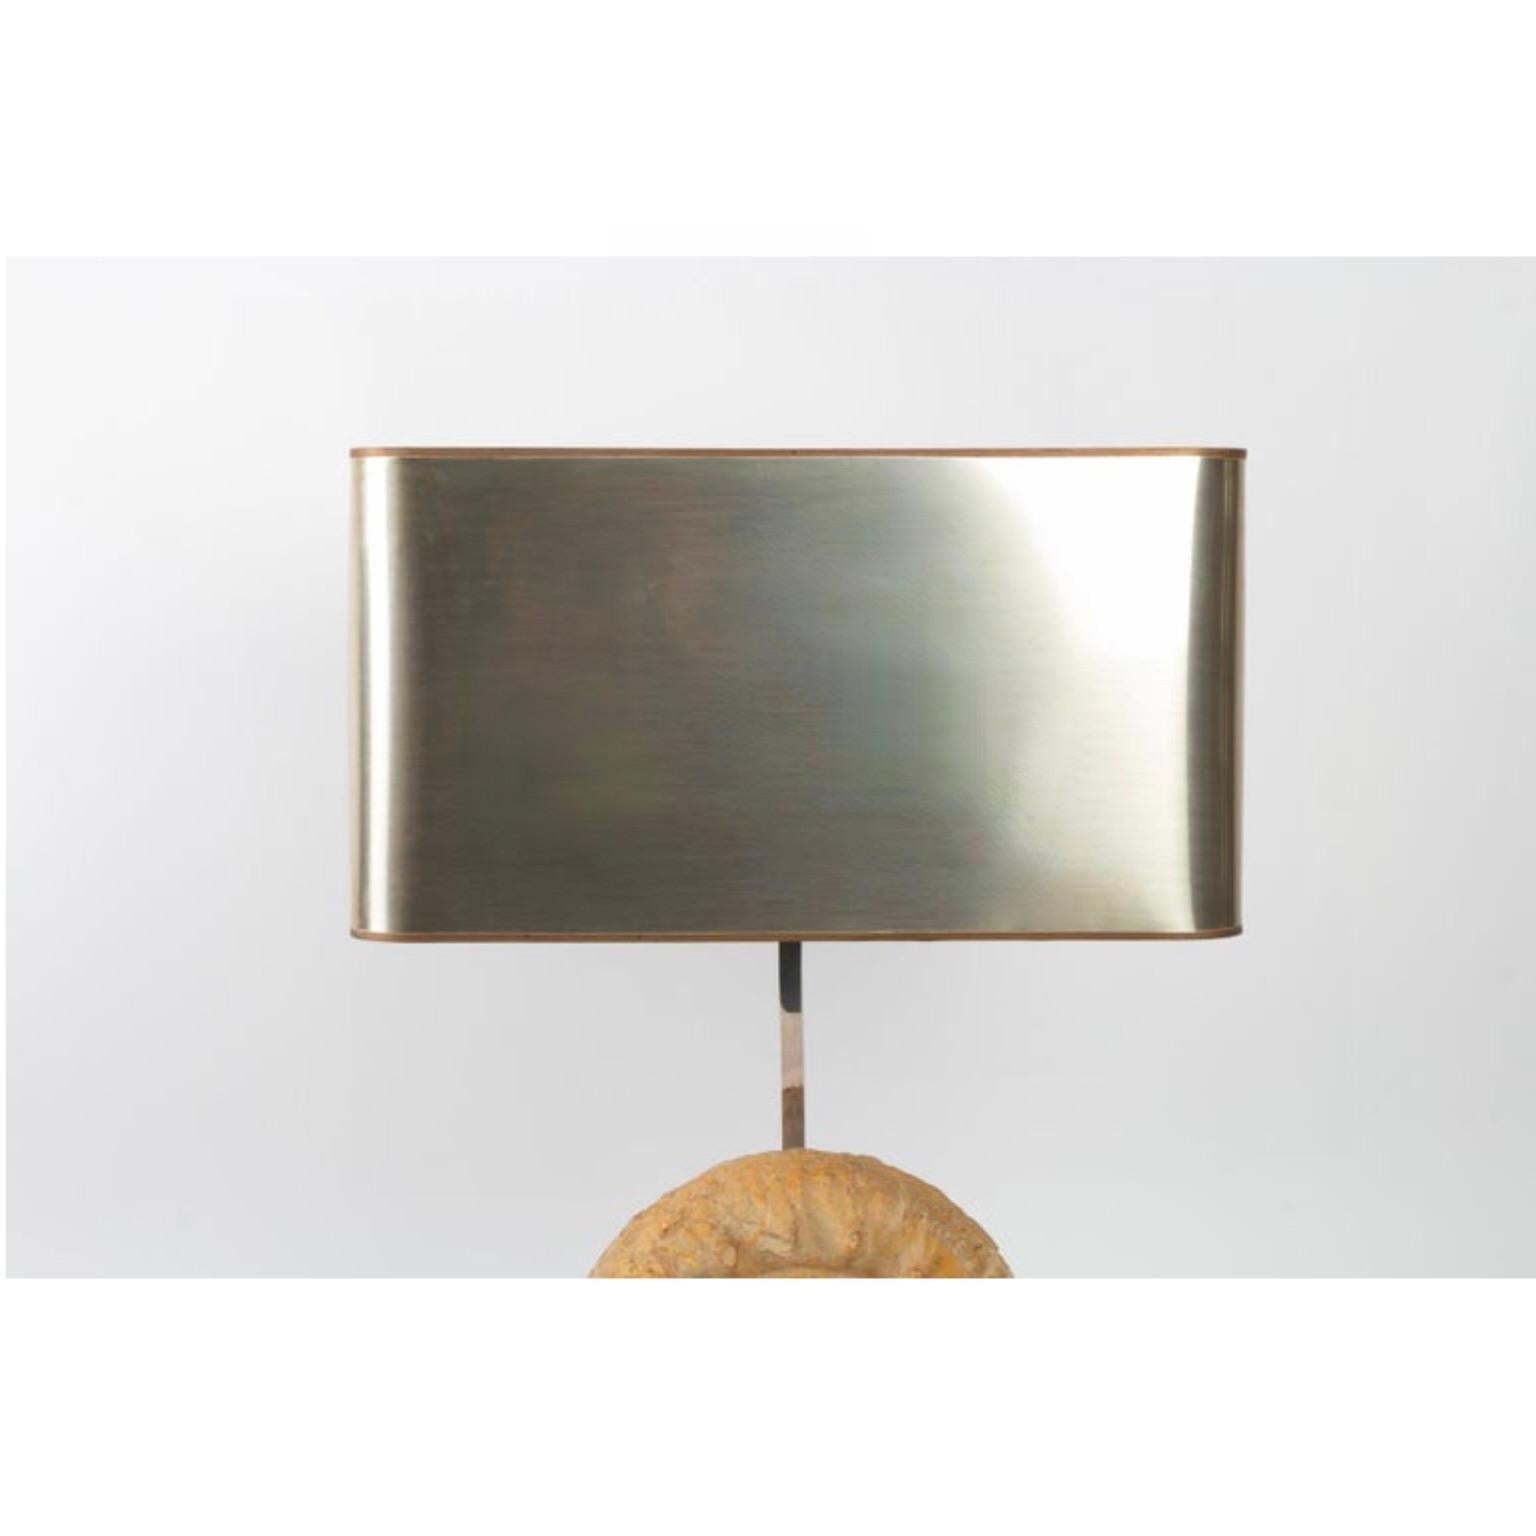 The base of the lamp of rectangular section is out of brushed silver plated steel on which is posed a beautiful fossilized ammonite.
A square section rod in silver plated metal passing at the back of the lamp on the base goes up to the top of the